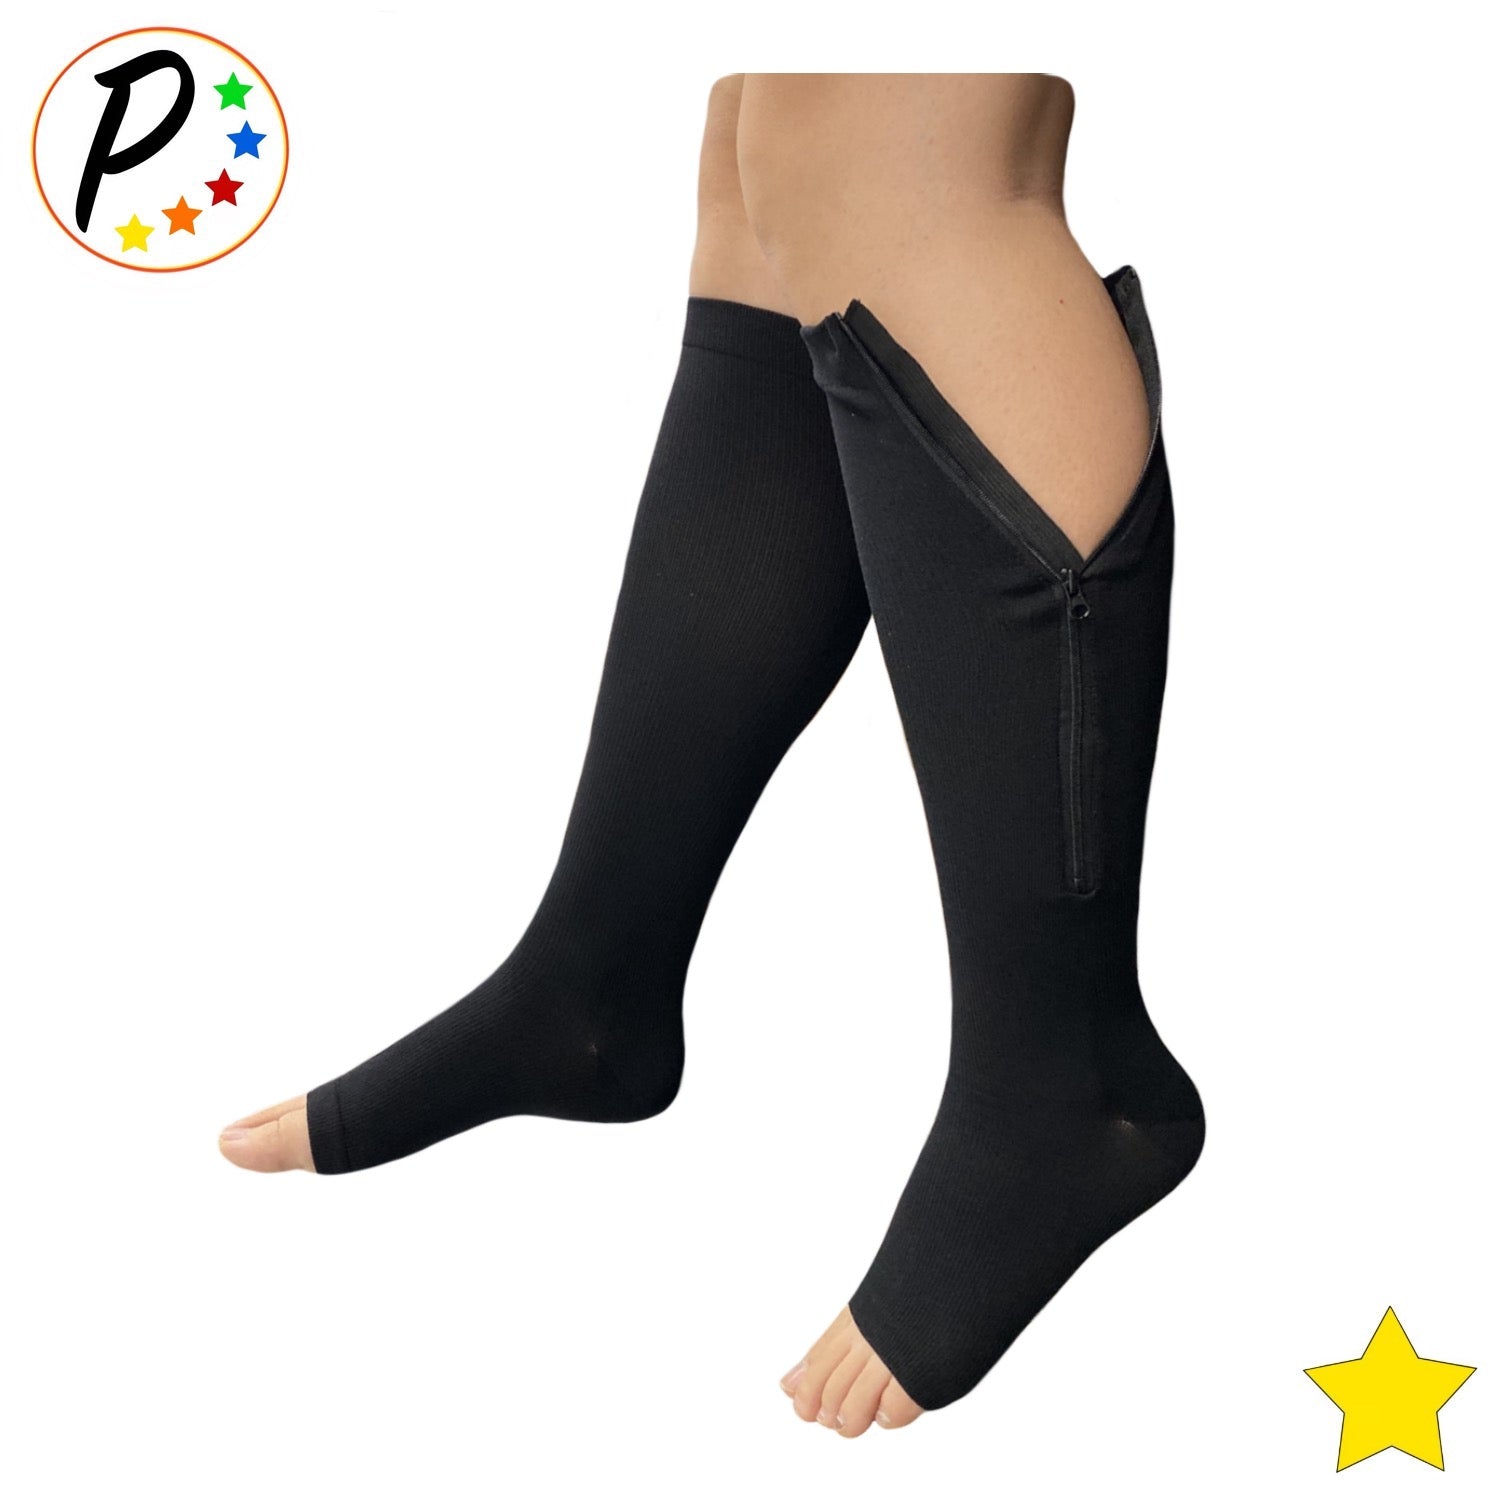  Bacophy 2 Pairs Medical Zipper Compression Socks 15-20 mmHg  Women Men, Knee Length Open Toe Firm Support Calf Stocking, Graduated  Hosiery for Fitness, Flight, Running Marathon : Clothing, Shoes & Jewelry